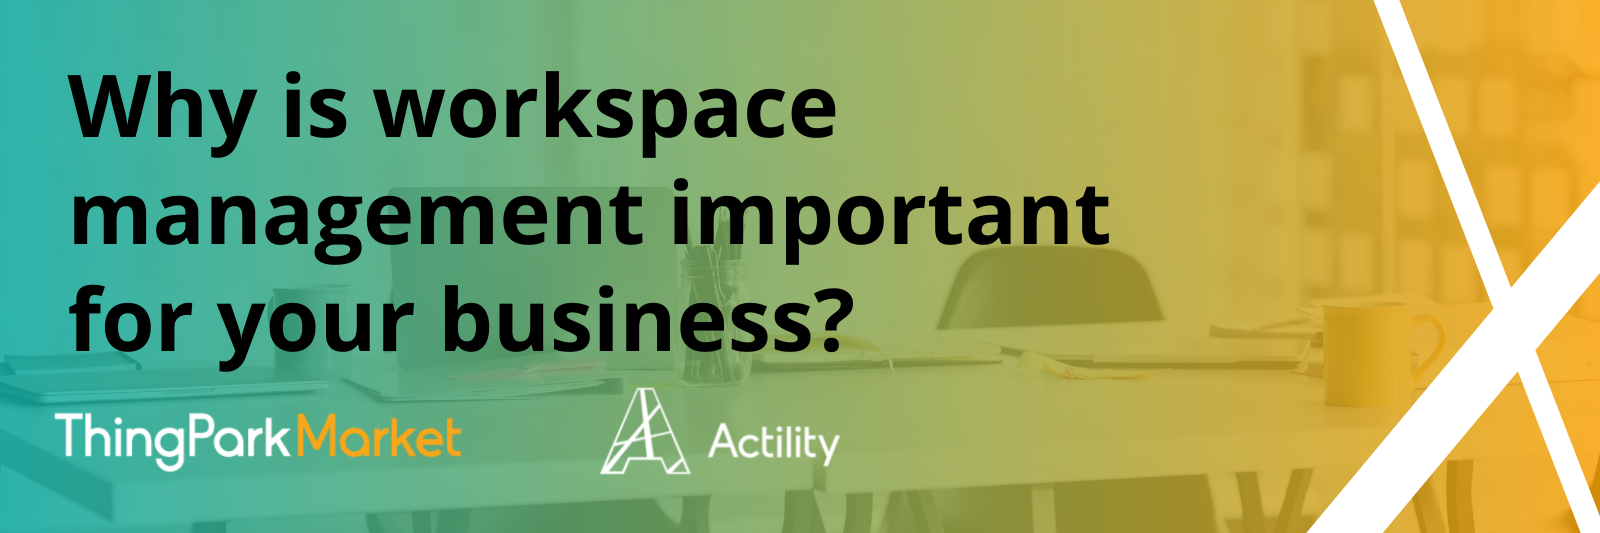 Why is worskpace management important for your business?